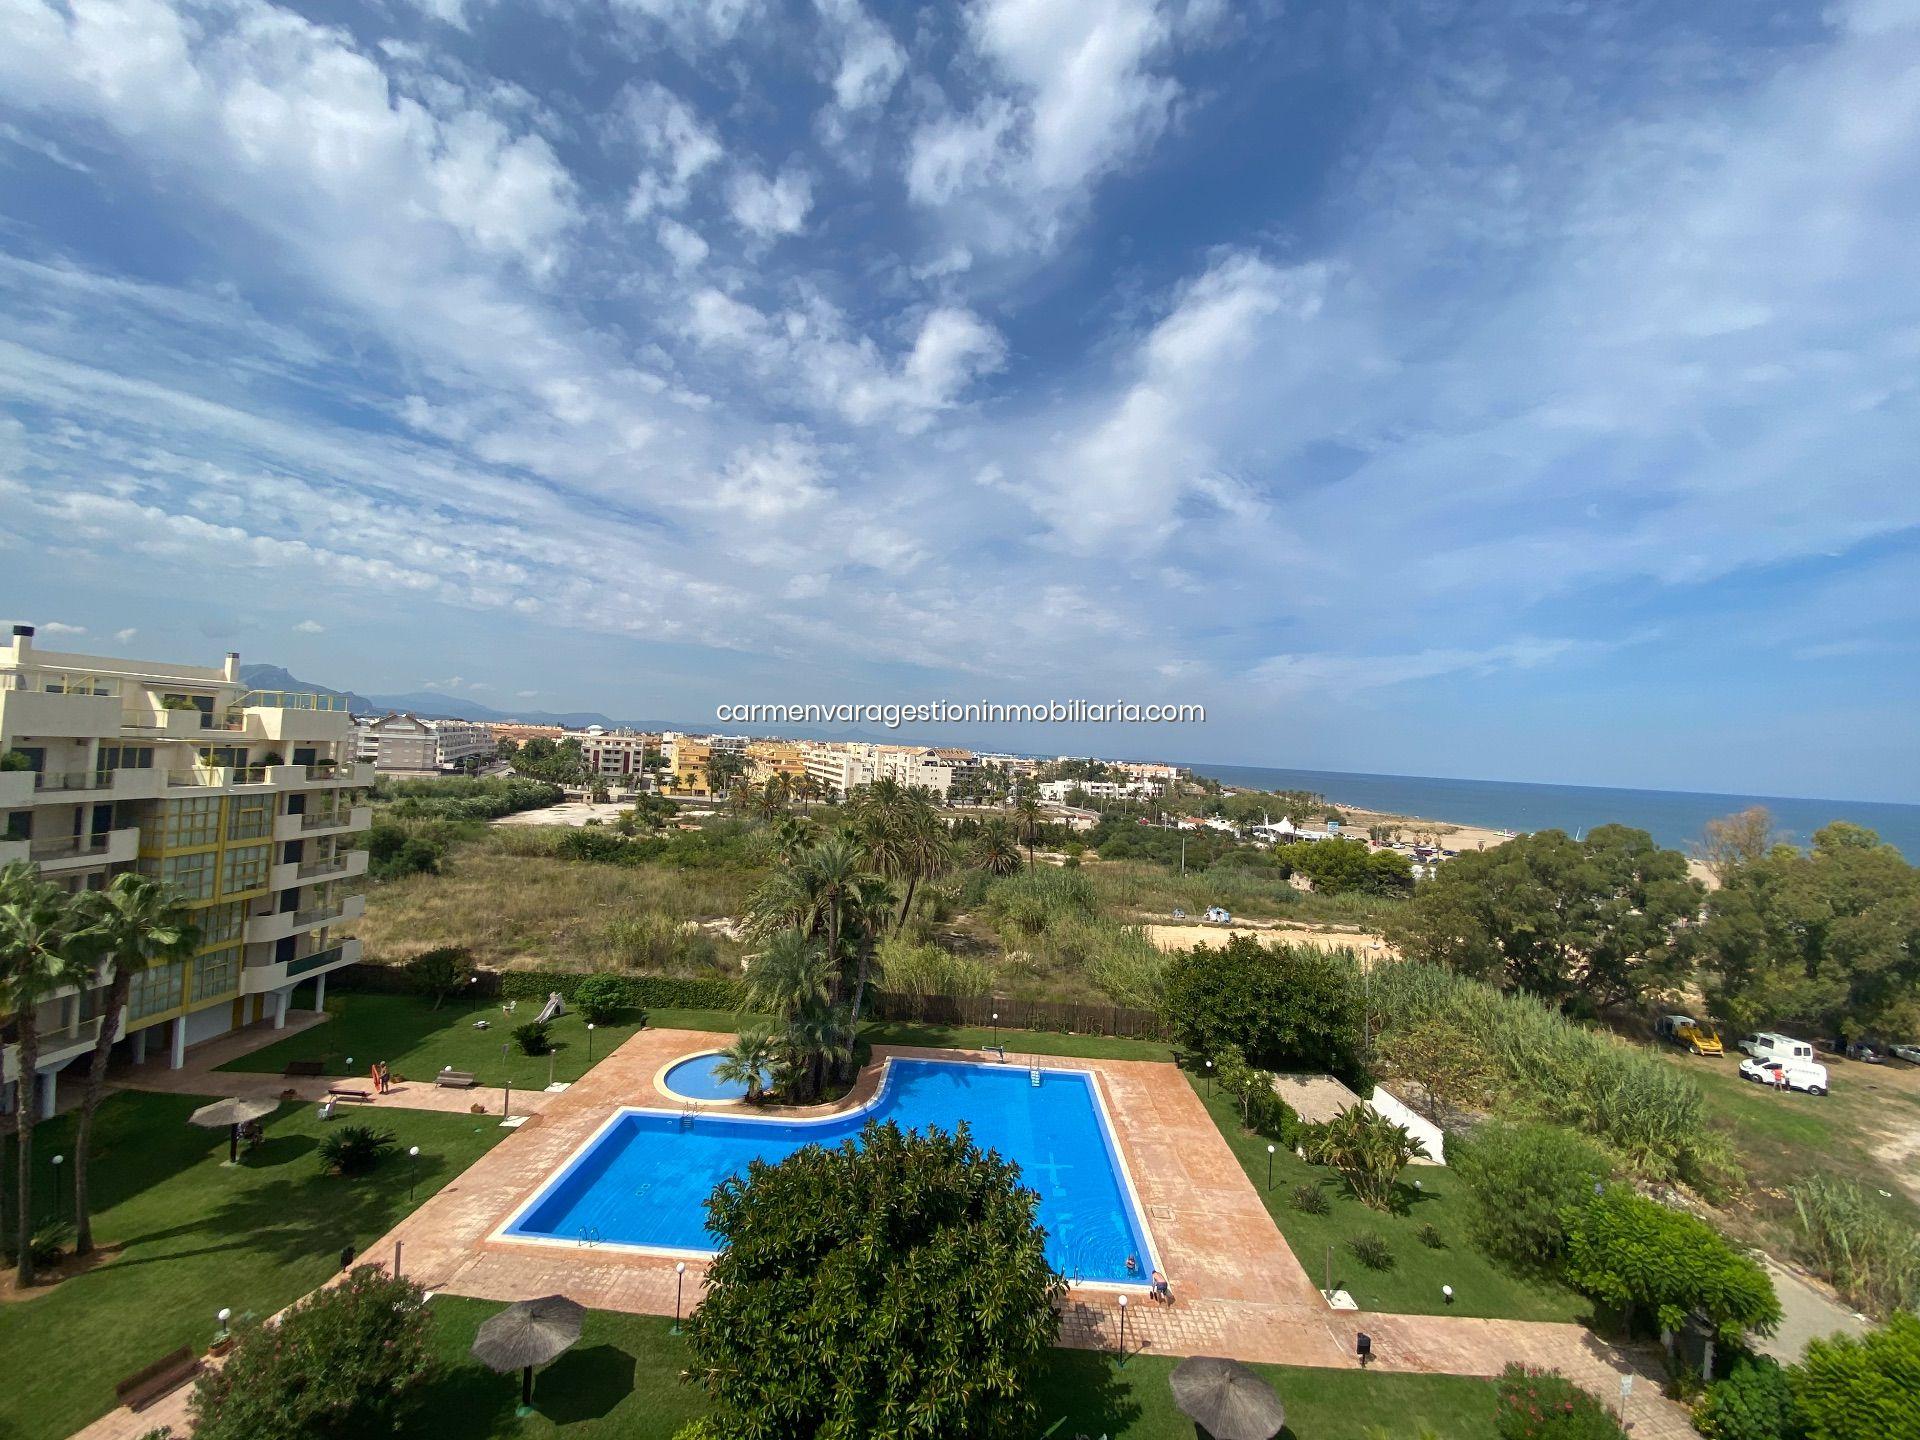 SALE OF DUPLEX PENTHOUSE IN DENIA. PANORAMIC VIEWS OF THE MEDITERRANEAN.